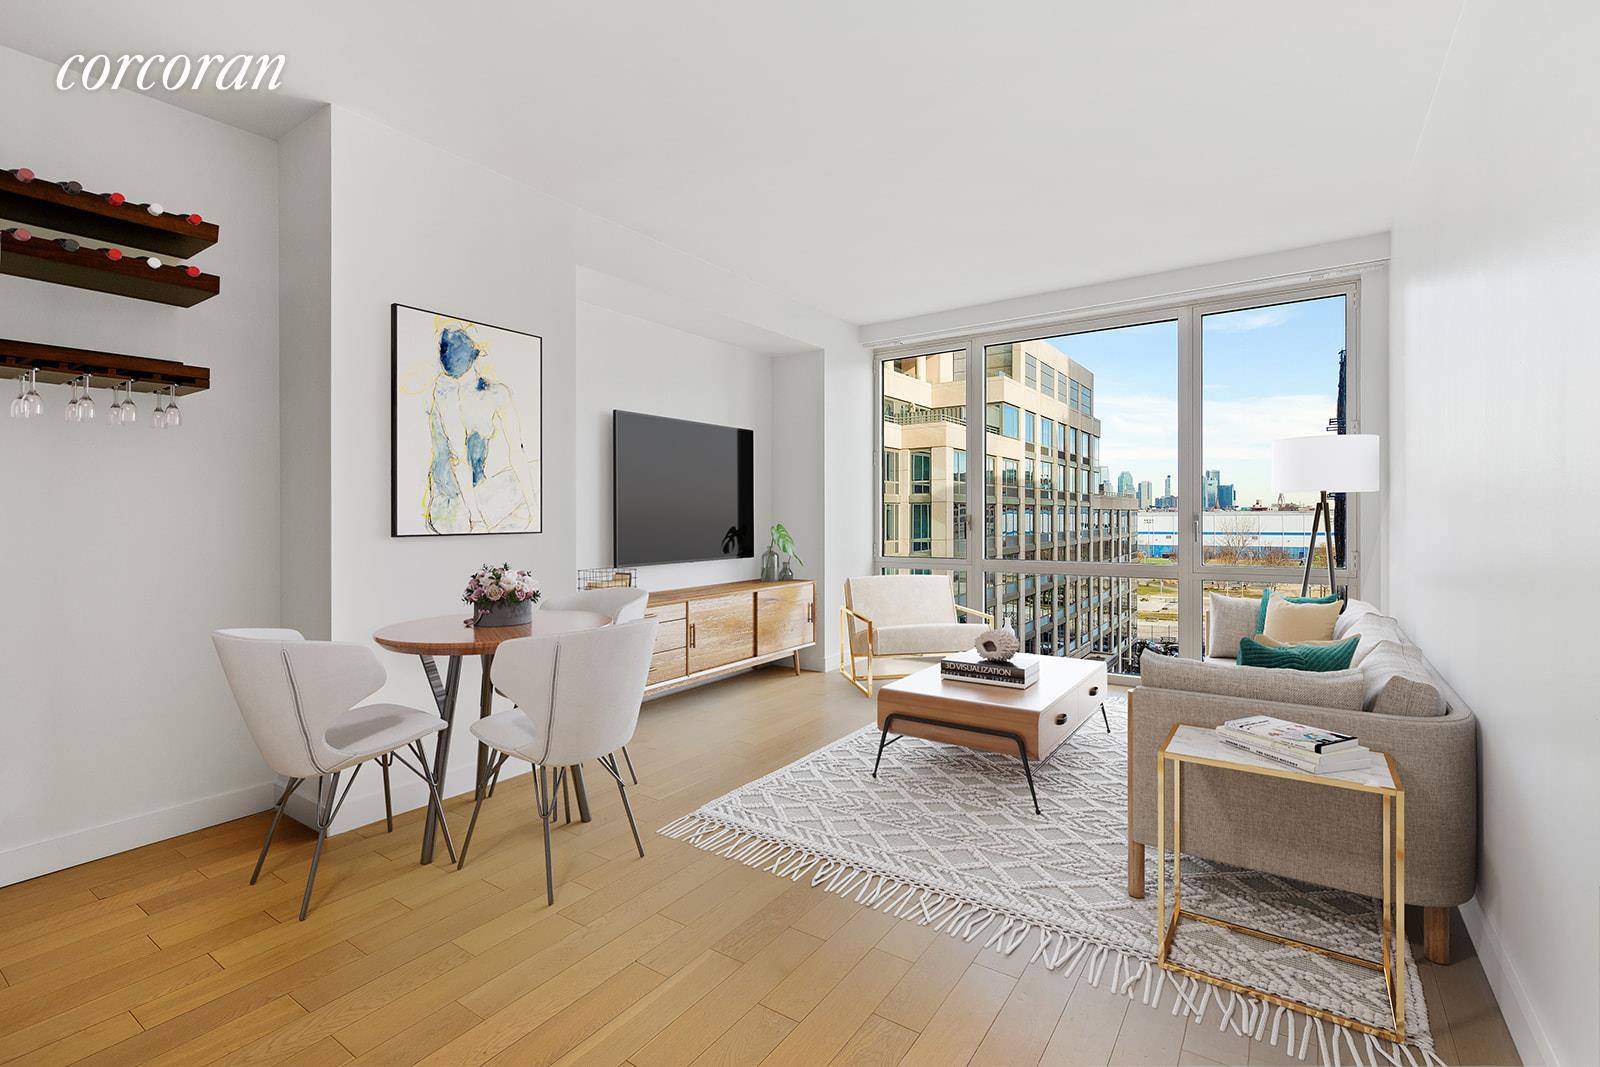 22 NORTH 6TH STREET, APT 7F, PRIME WILLIAMSBURG THE EDGE A A PREMIER WATERFRONT CONDOMINIUM This is a tremendous opportunity to purchase a sprawling one 1 bedroom plus large home ...